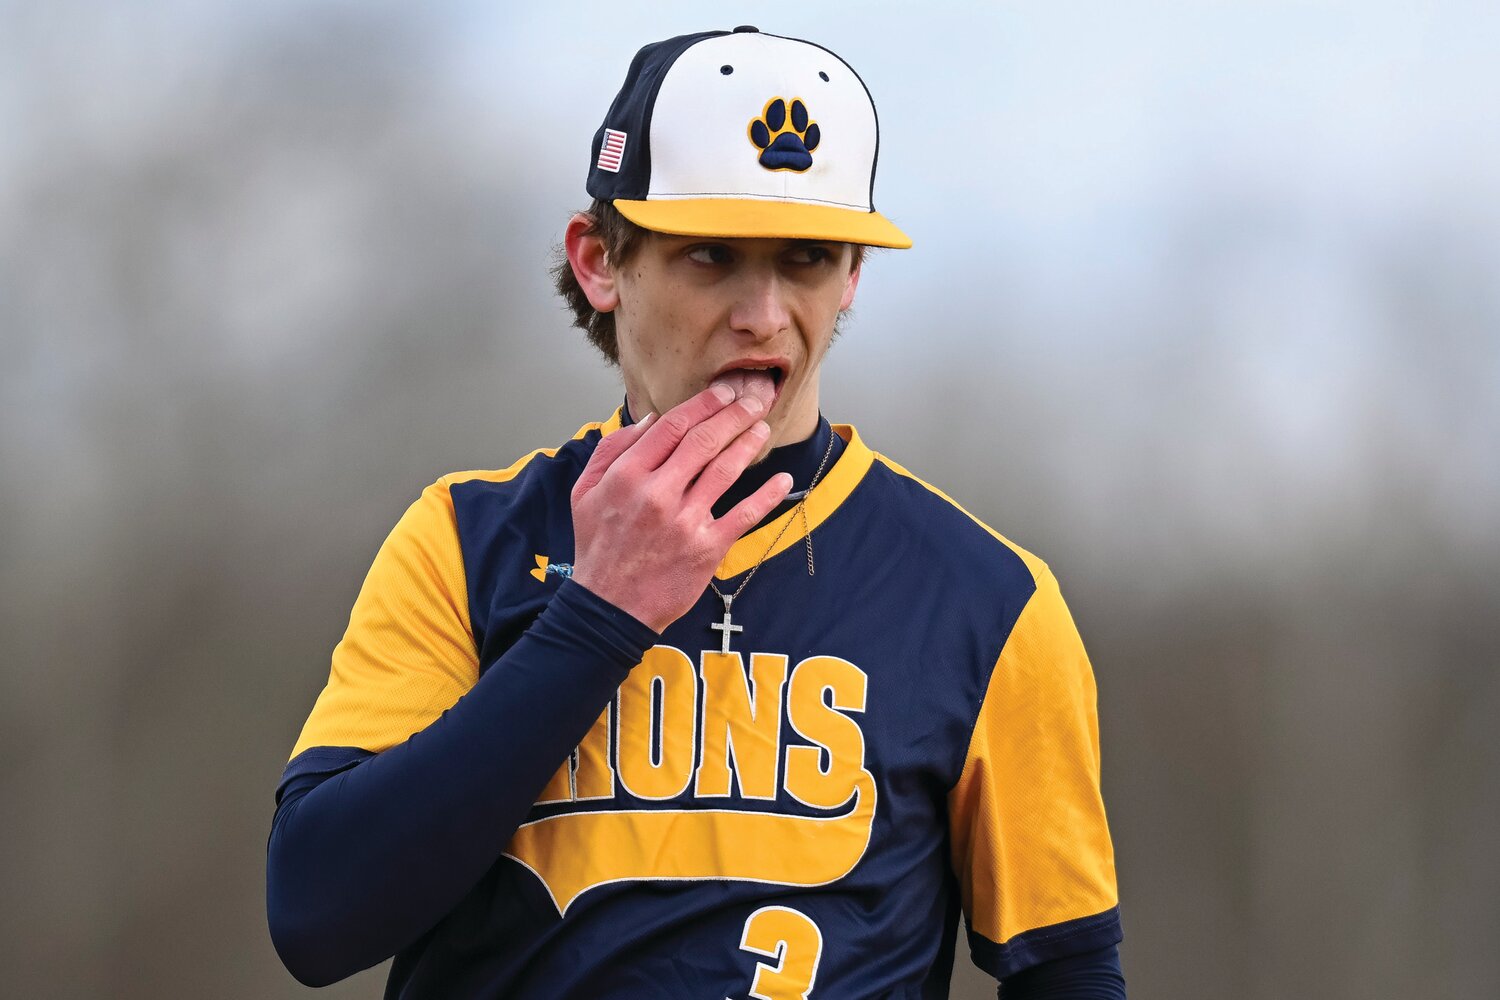 New Hope-Solebury pitcher Tyler Corino tries to get the feeling back in his hand on a chilly day for baseball.